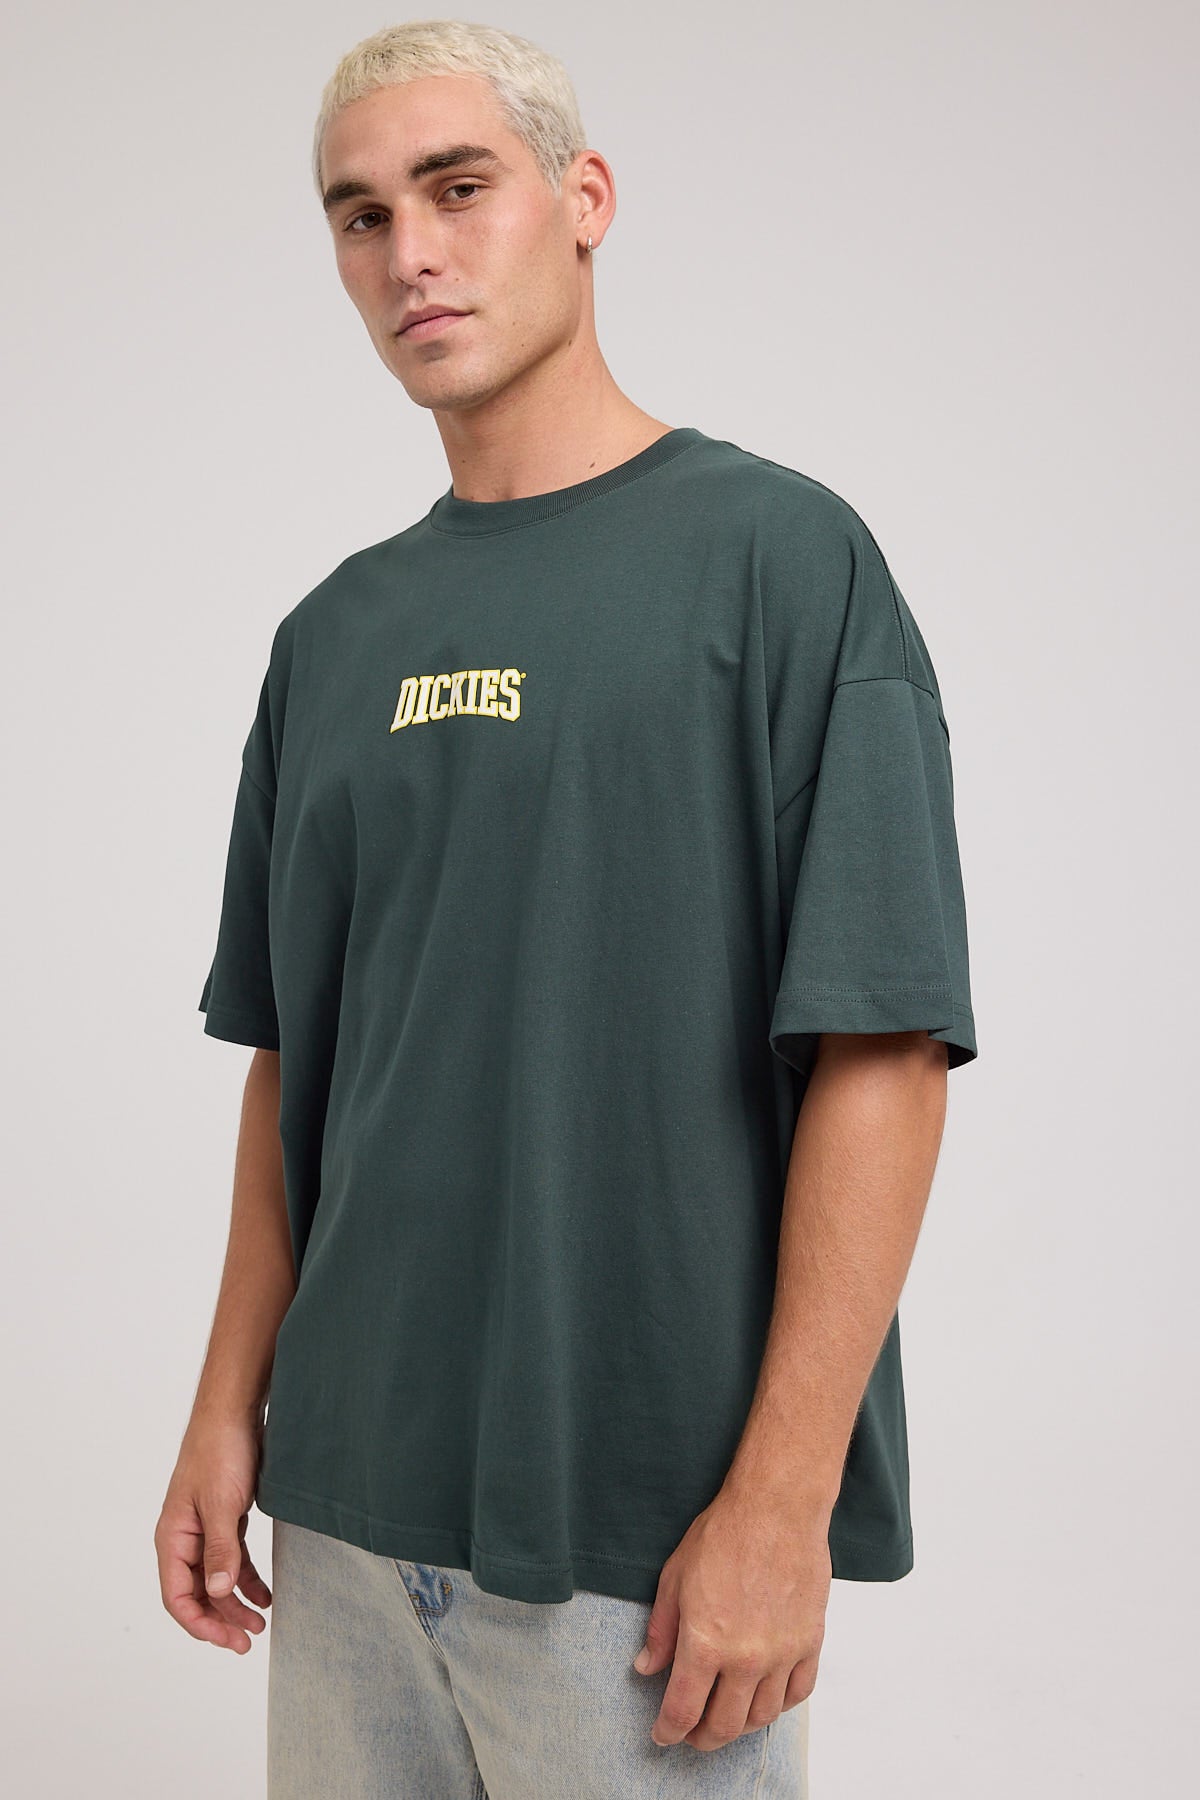 Dickies Pennellville 330 Fit Tee Hunter Green